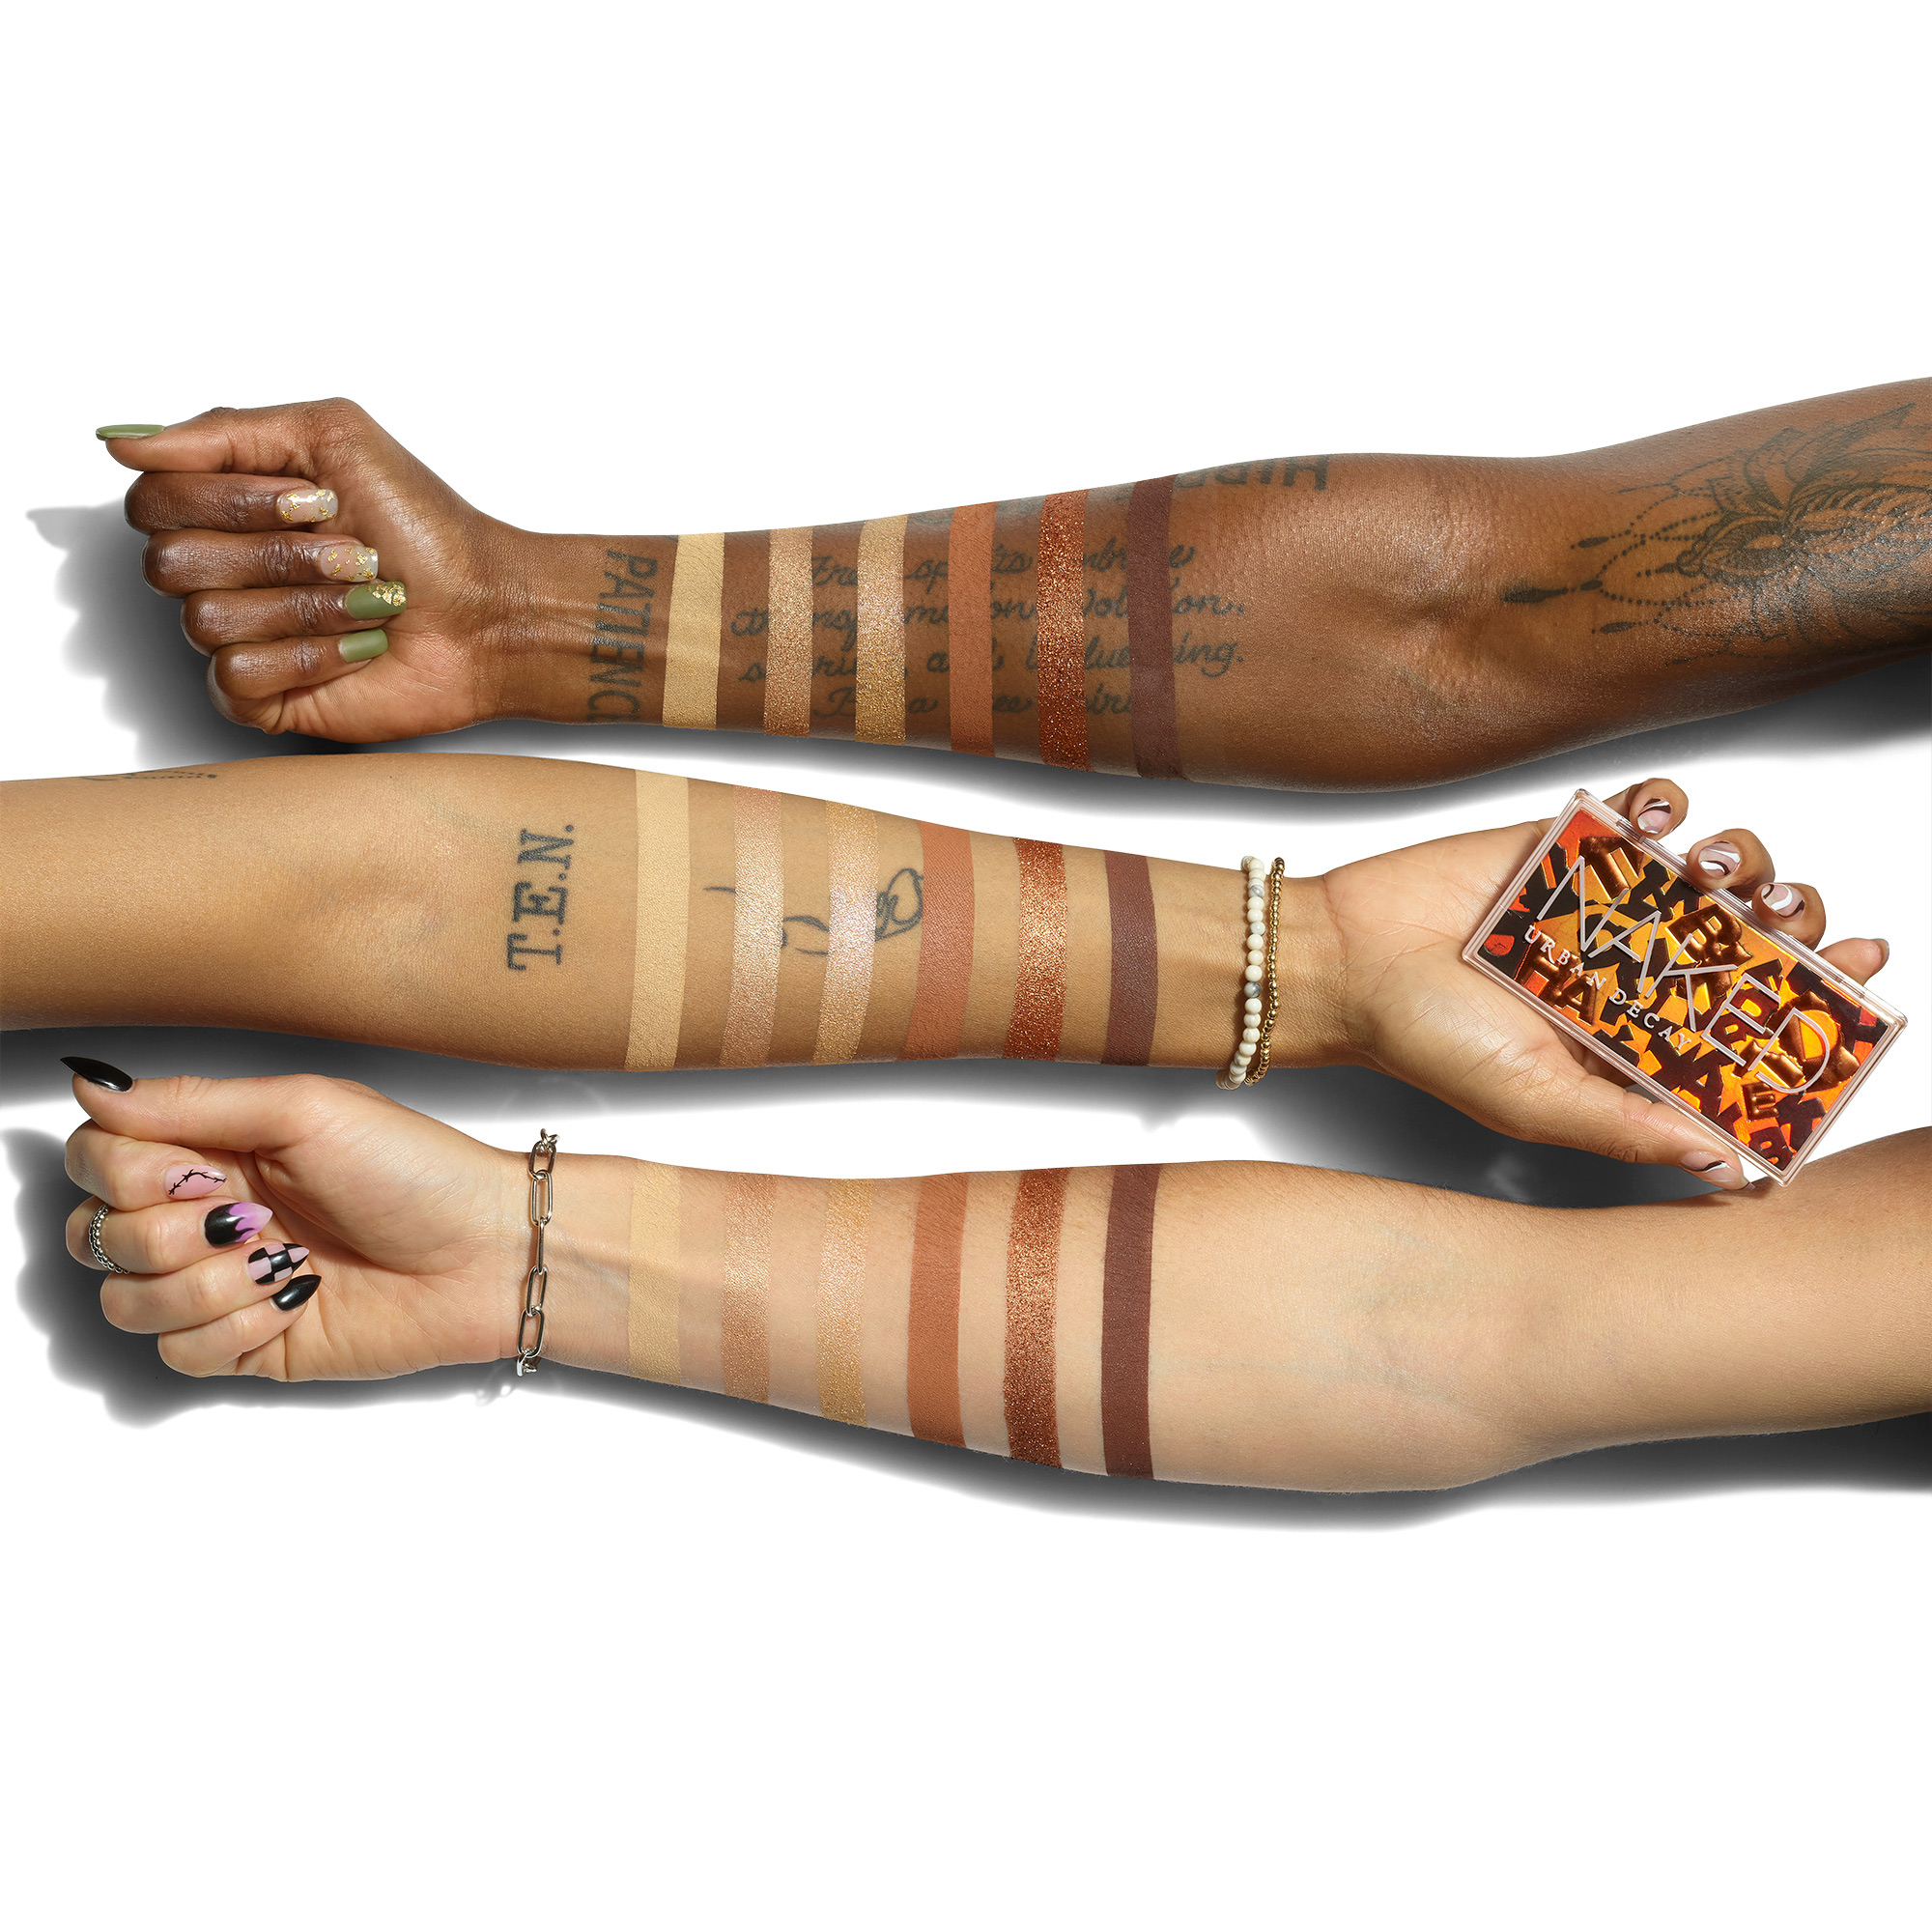 NAKED_MINI_HALF_BAKED_ARM_SWATCH_0548_04